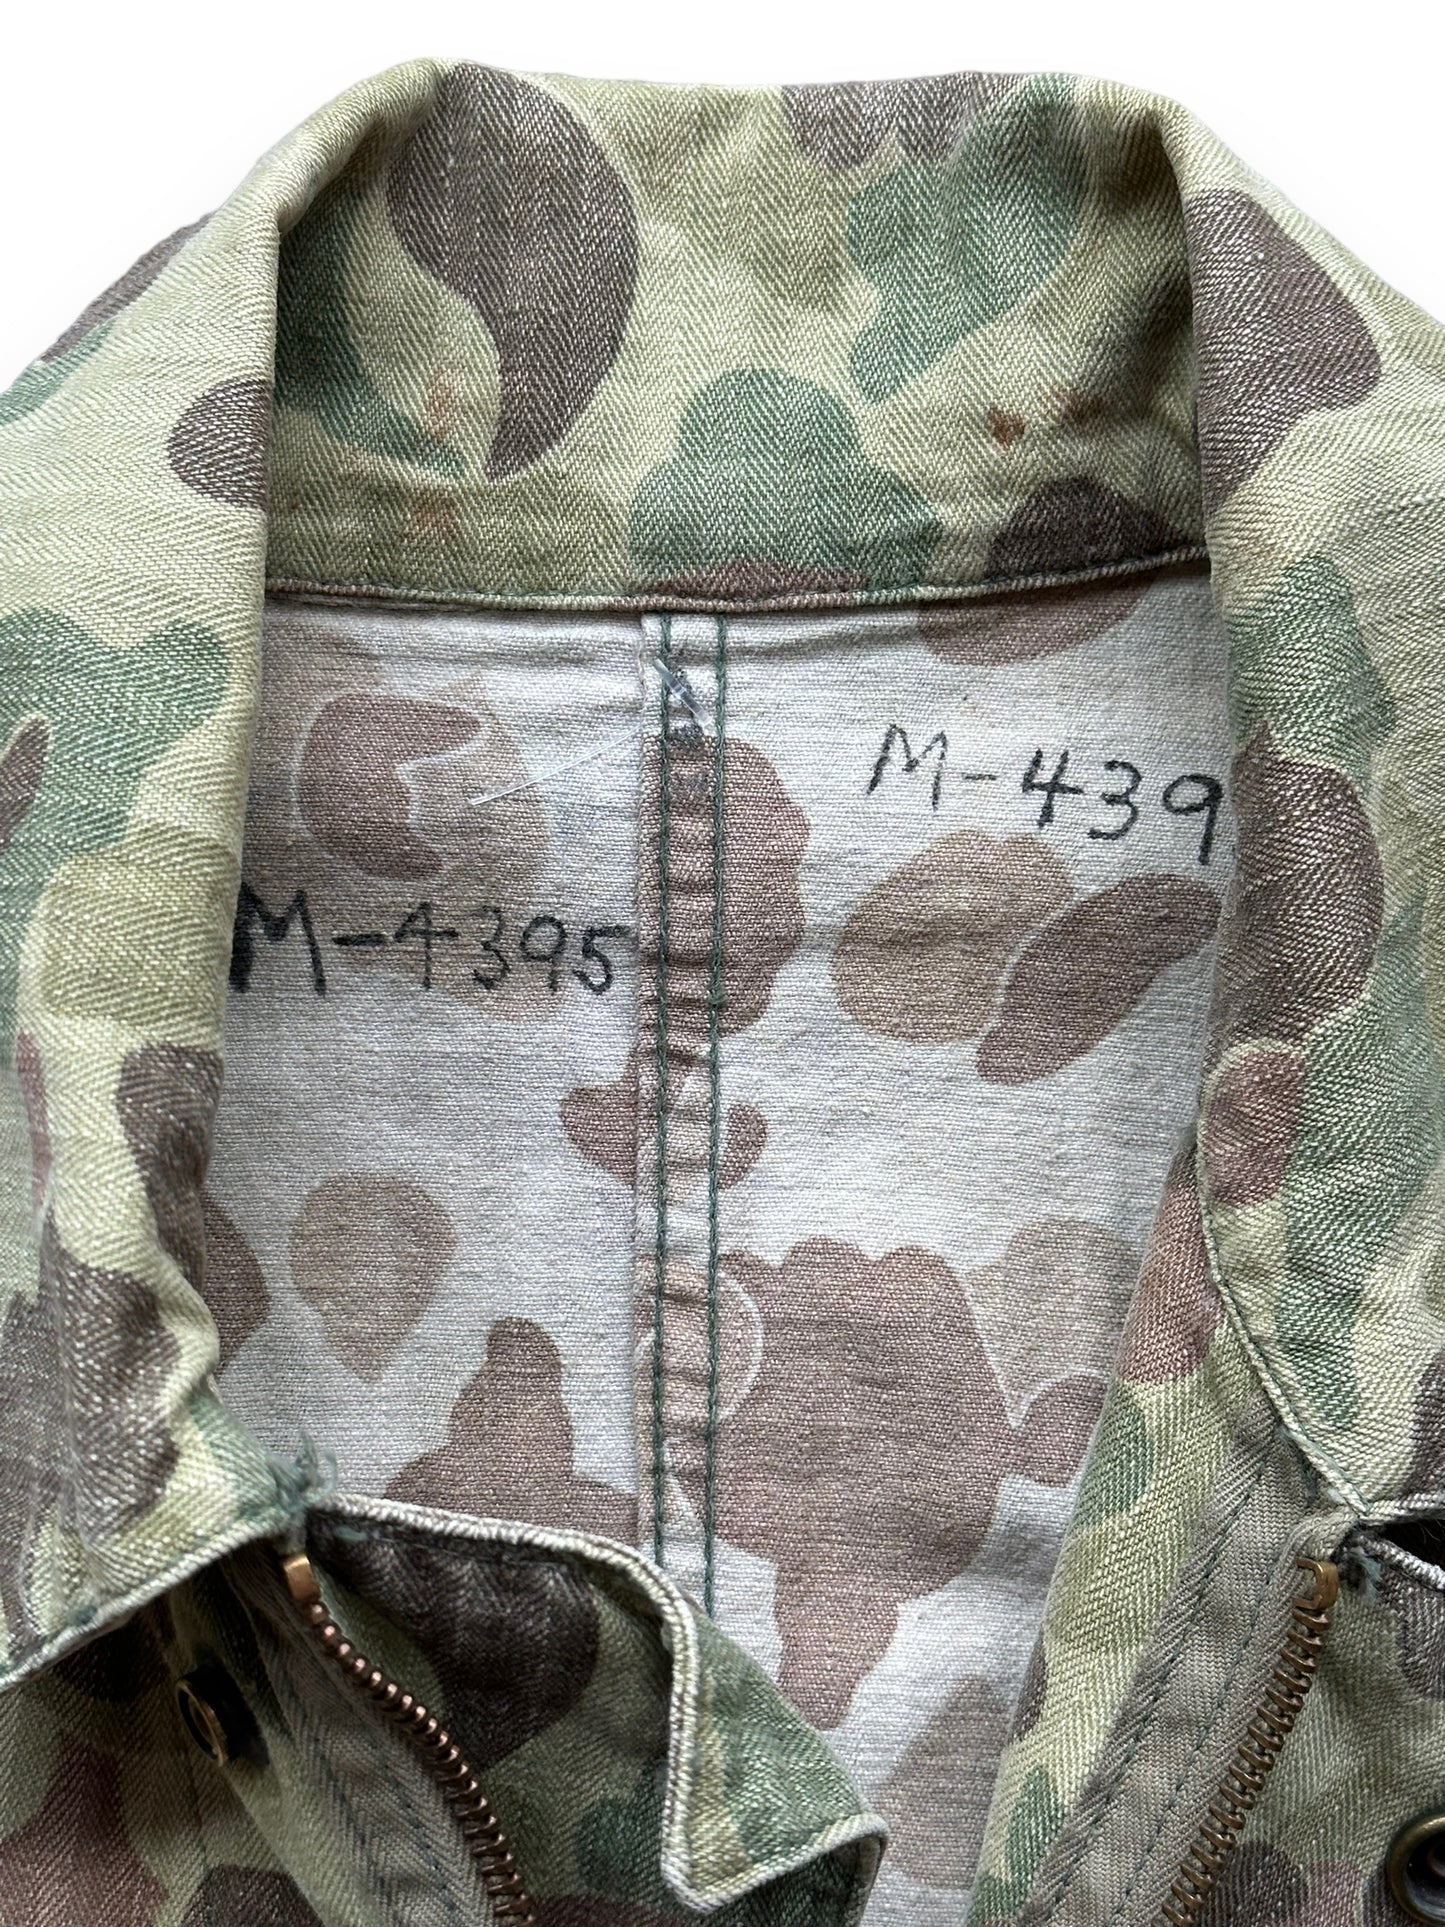 Tagging View of Vintage M-4395 HBT Frogskin Camo Coveralls SZ M | Vintage Frog Skin Camo Pants Seattle | Barn Owl Vintage Workwear